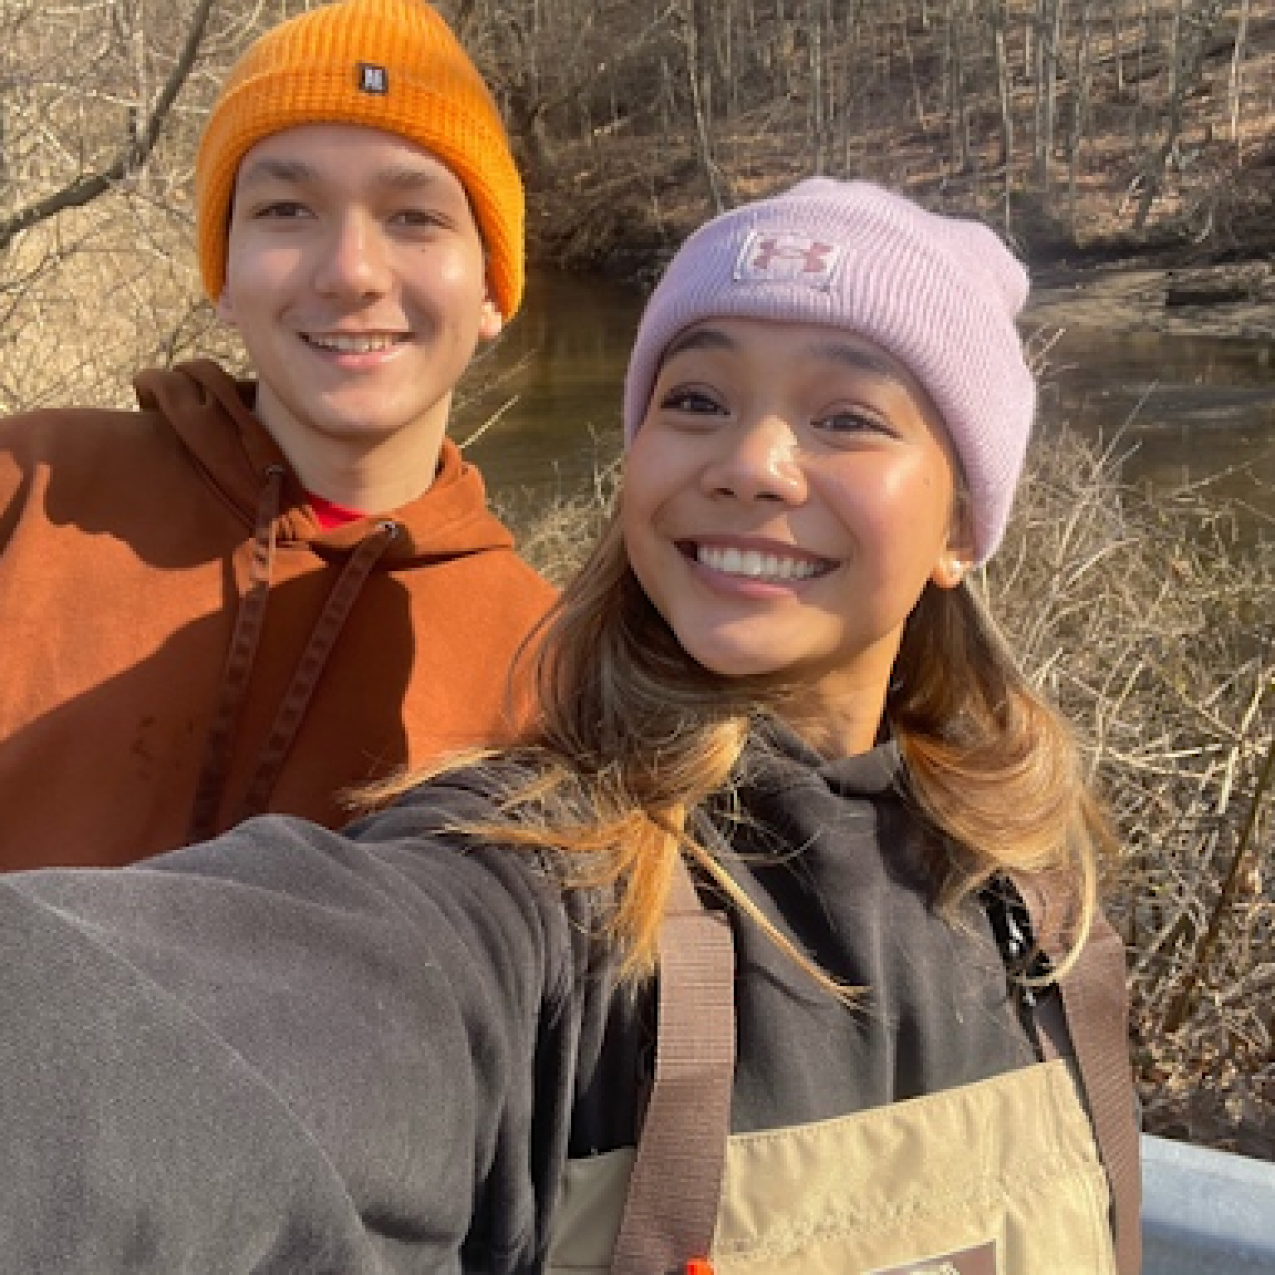 Eva and Benjamin are posing together for a selfie on the side of the road, overlooking the river. It is early spring, and the brush around them has not yet started to bloom. Benjamin is wearing a bright orange beanie as well as a muted orange sweatshirt. Eva is wearing a purple beanie, a black hoodie, an brown waders.